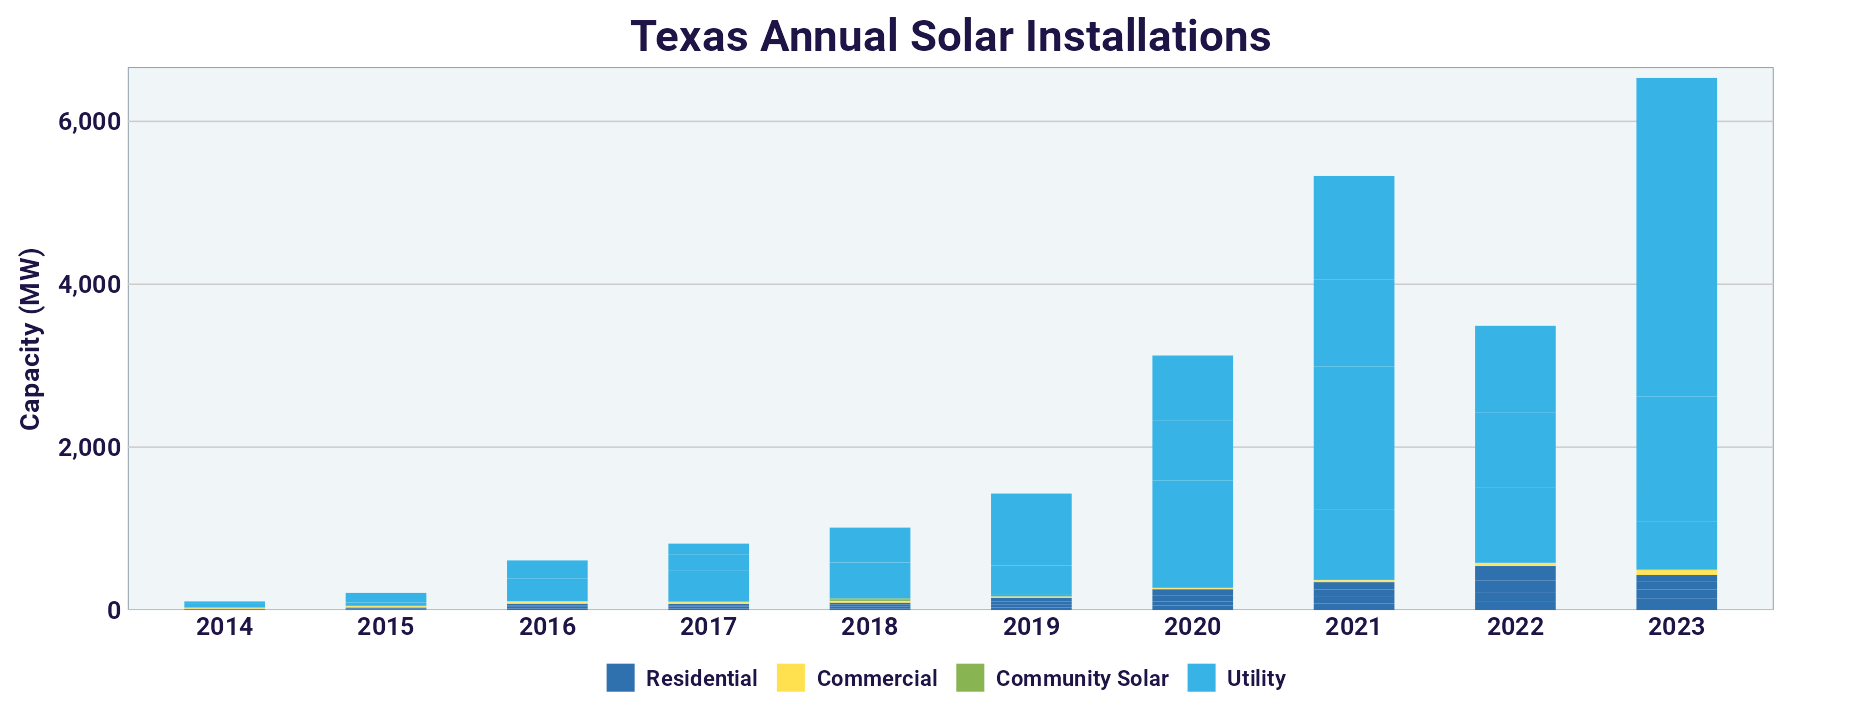 Annual Solar Installations in Texas Provided by SEIA.org